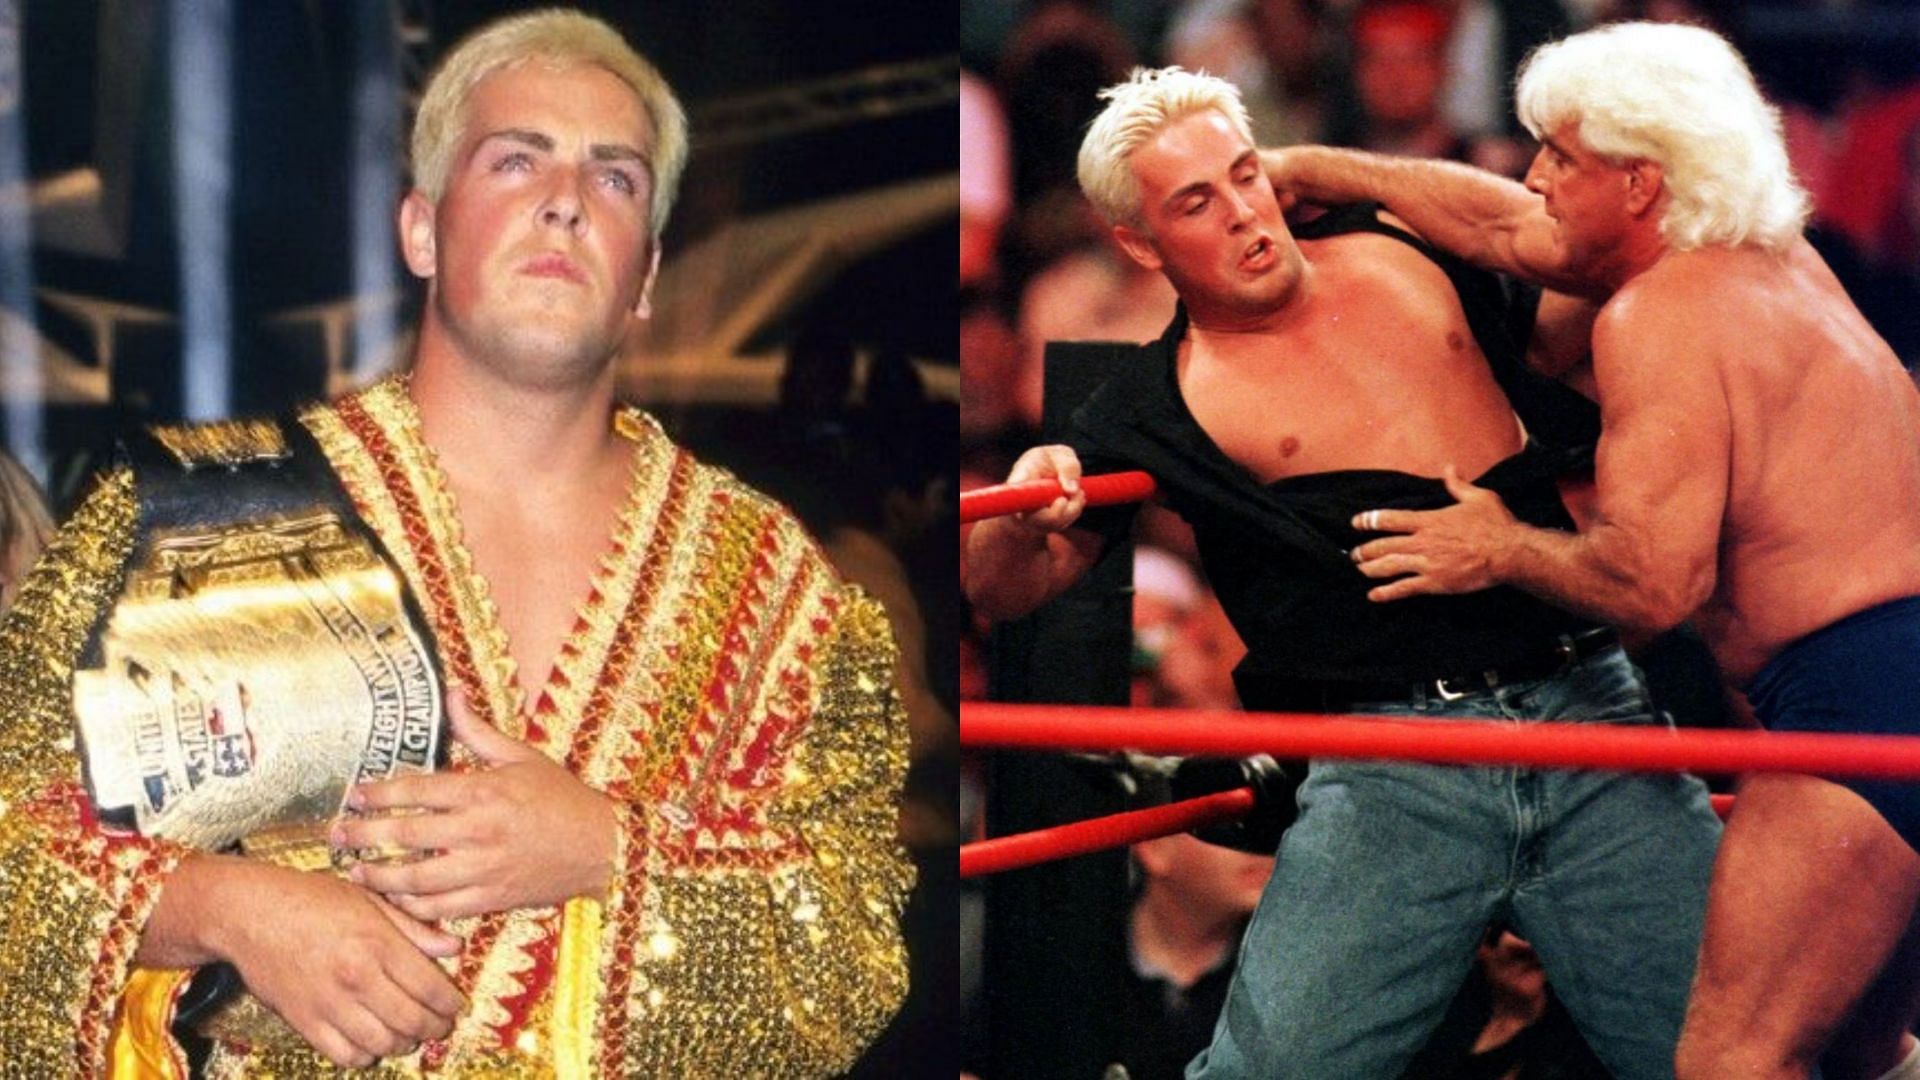 David Flair retired before his father Ric